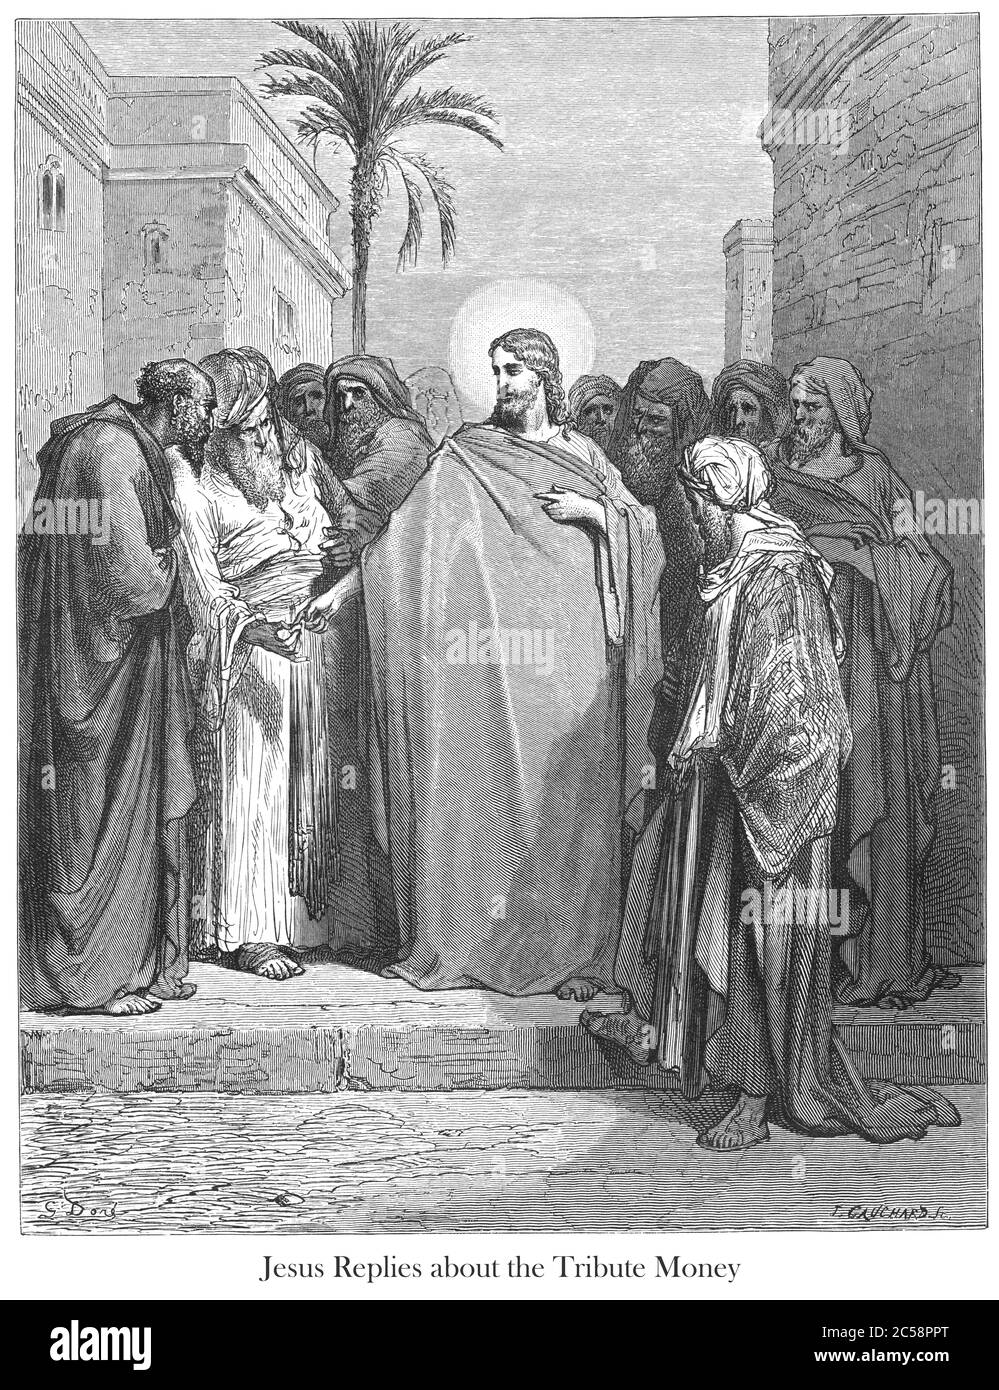 Christ and the Tribute Money [Matthew 22:20-21] From the book 'Bible Gallery' Illustrated by Gustave Dore with Memoir of Dore and Descriptive Letter-press by Talbot W. Chambers D.D. Published by Cassell & Company Limited in London and simultaneously by Mame in Tours, France in 1866 Stock Photo